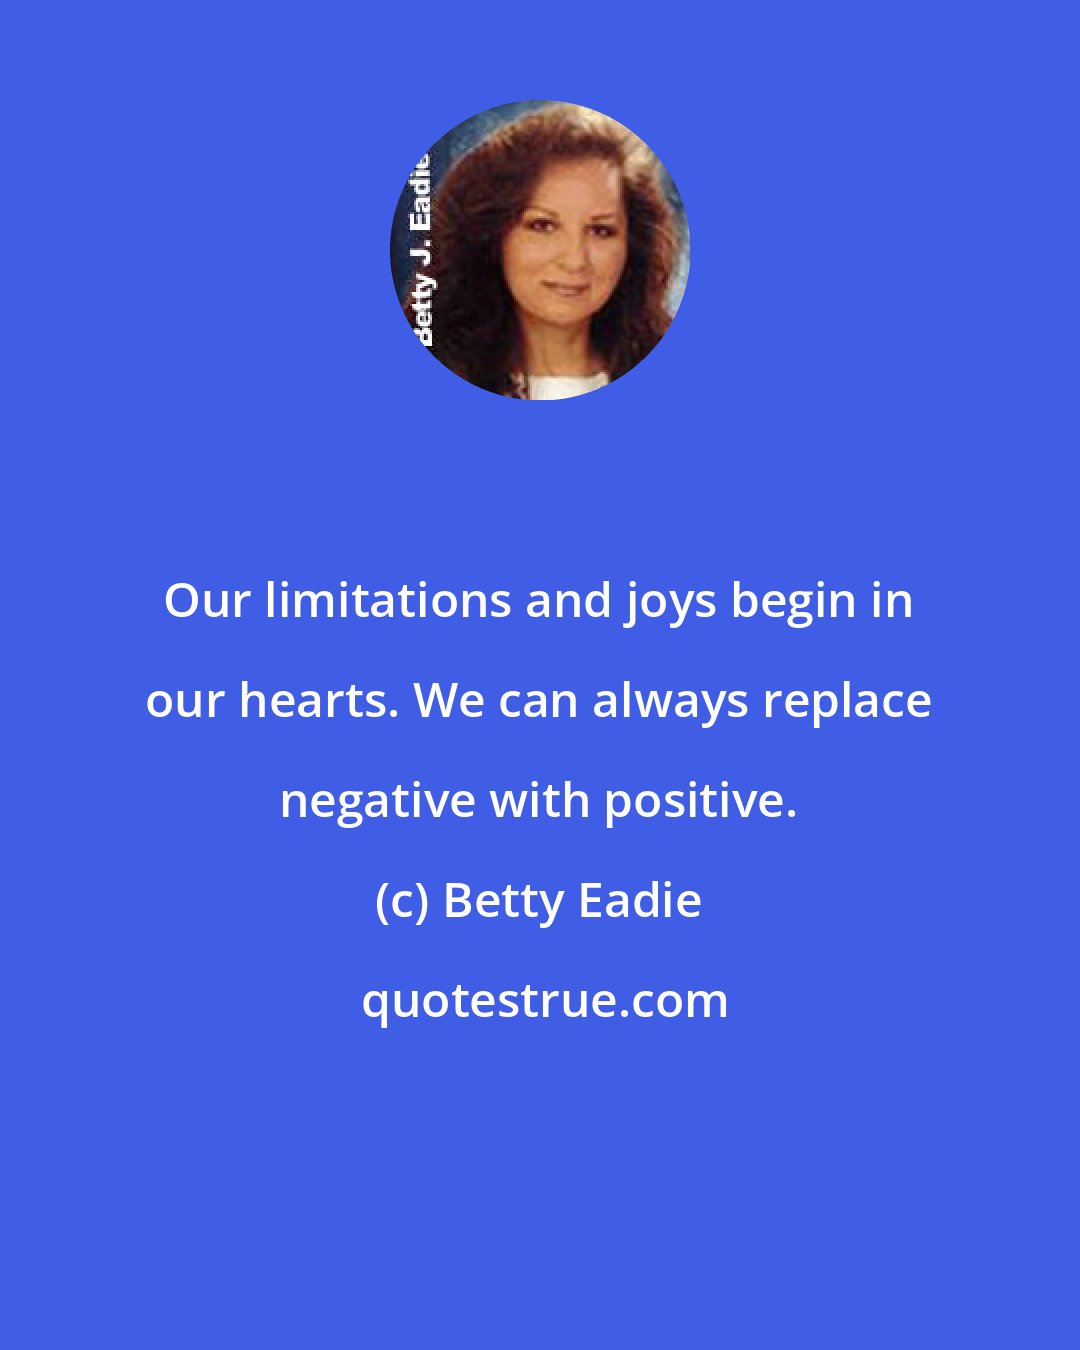 Betty Eadie: Our limitations and joys begin in our hearts. We can always replace negative with positive.